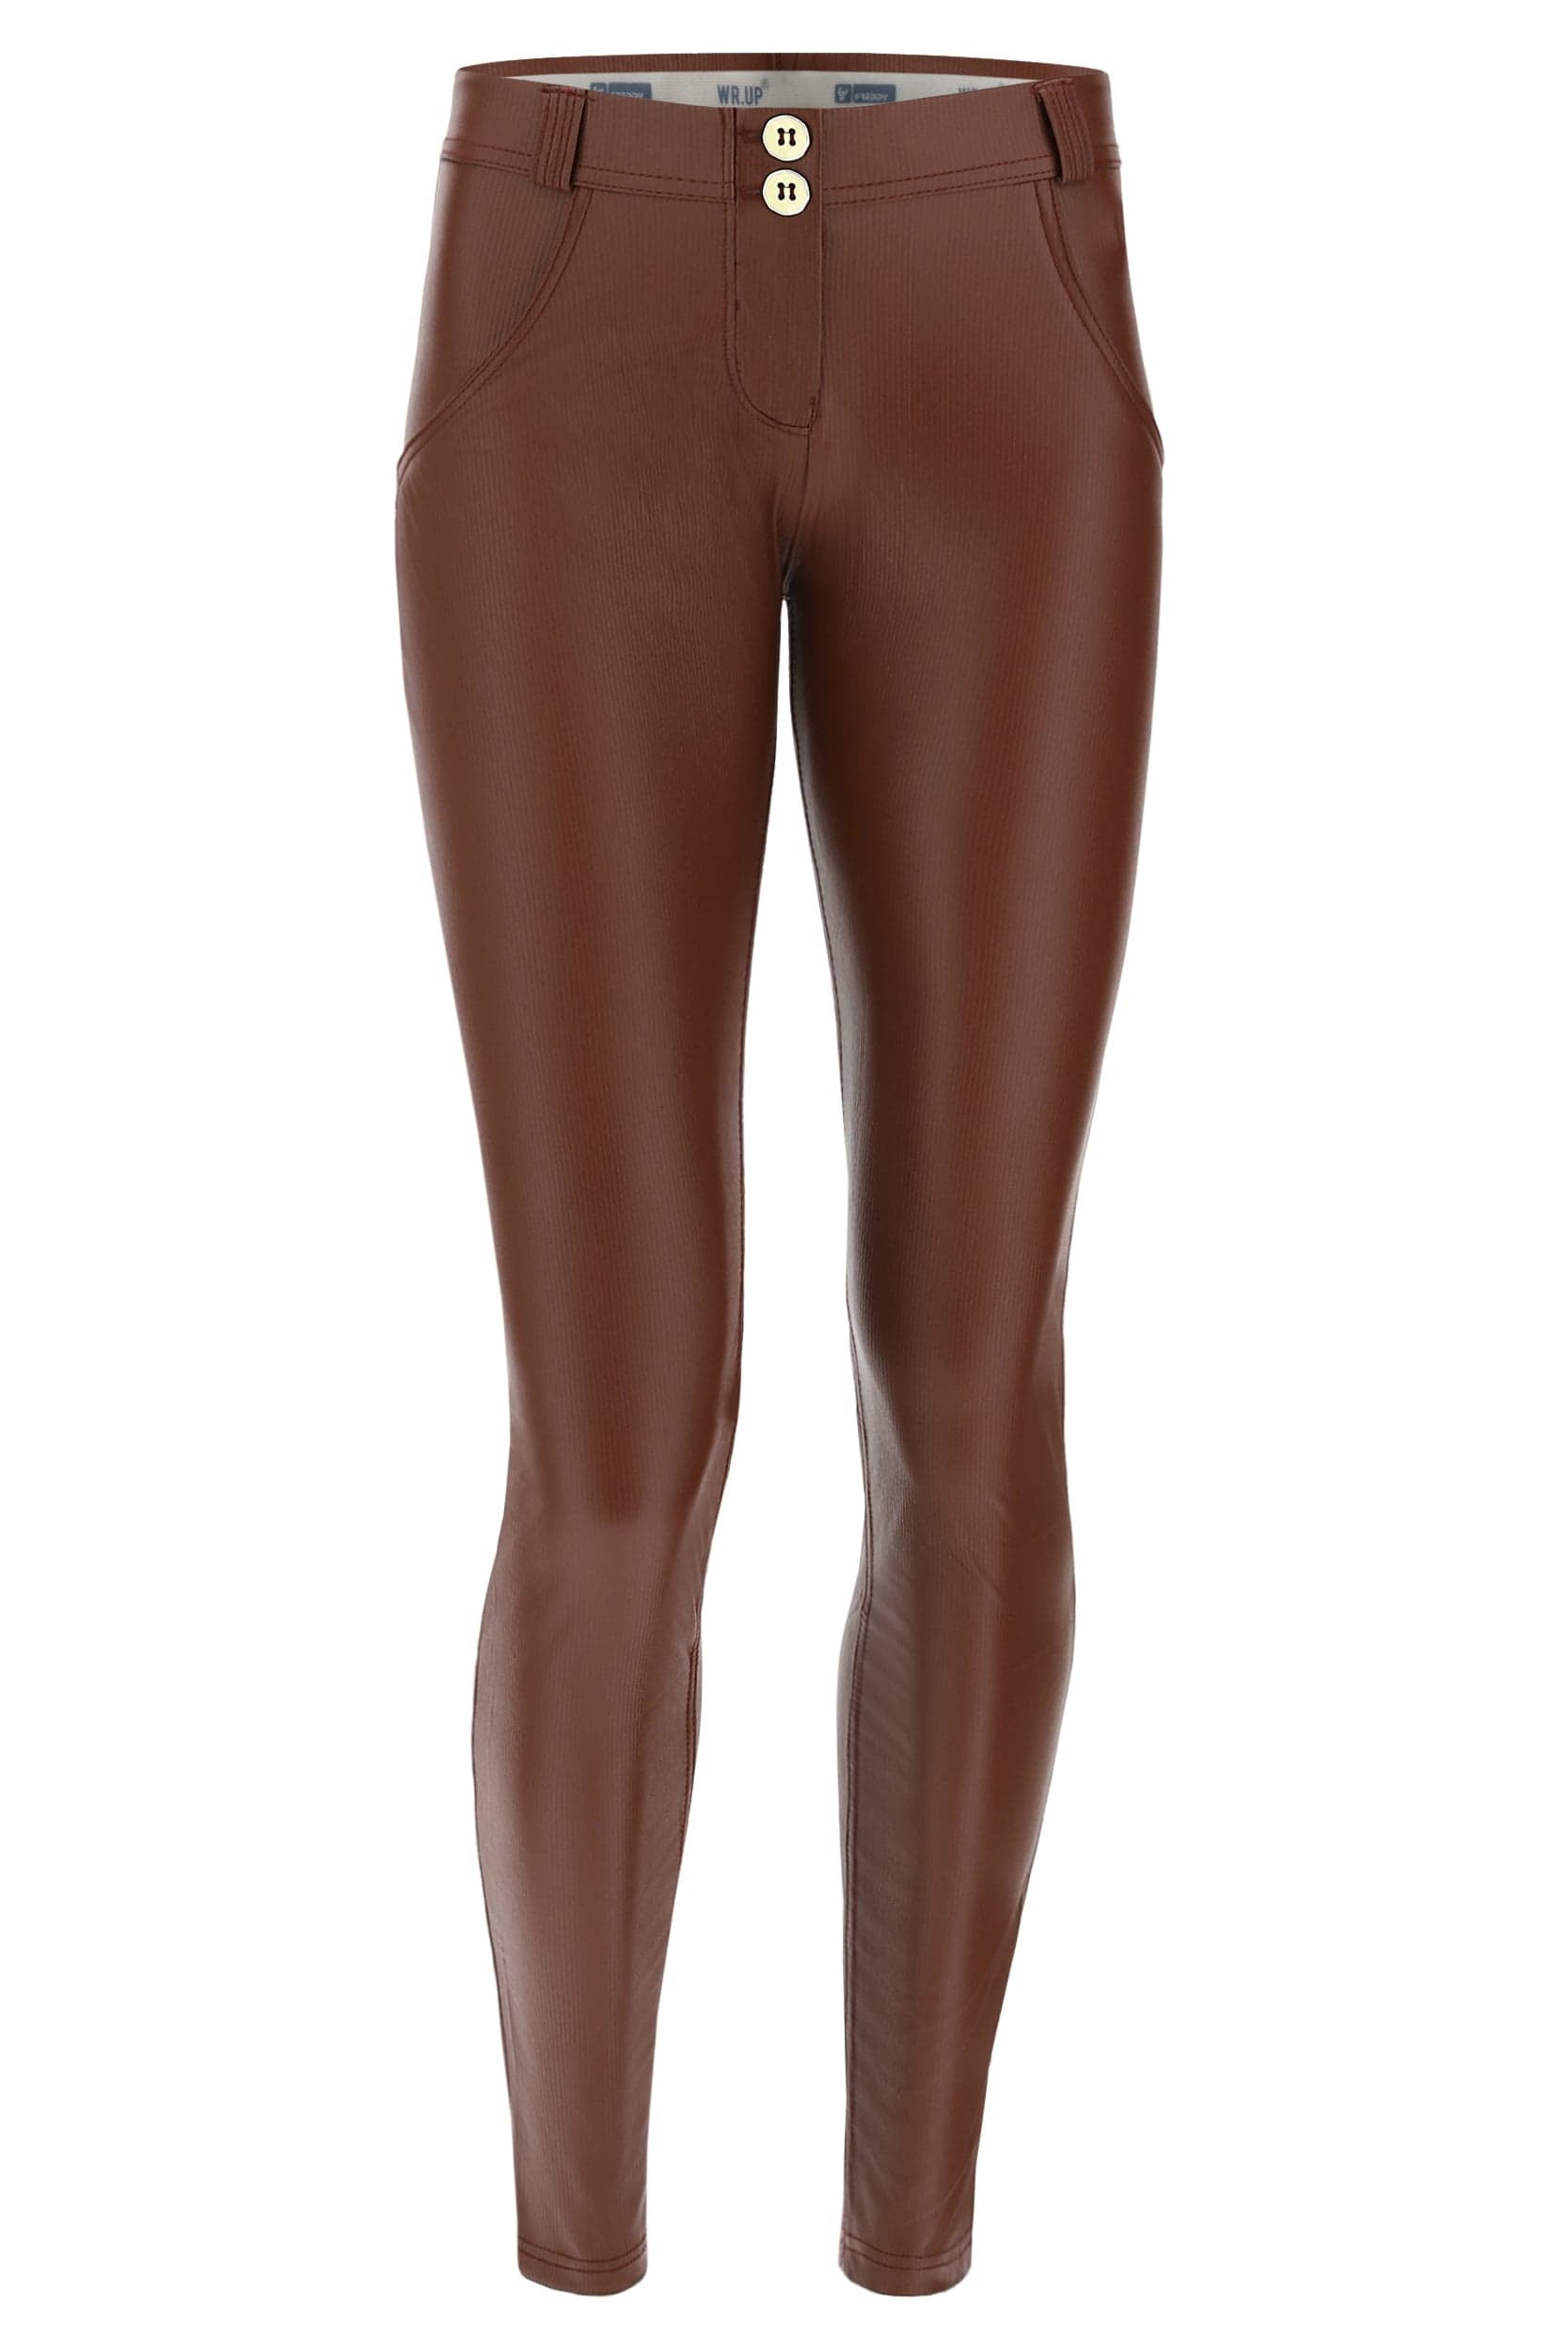 WR.UP® Faux Leather - Mid Rise - Full Length - Brown 2